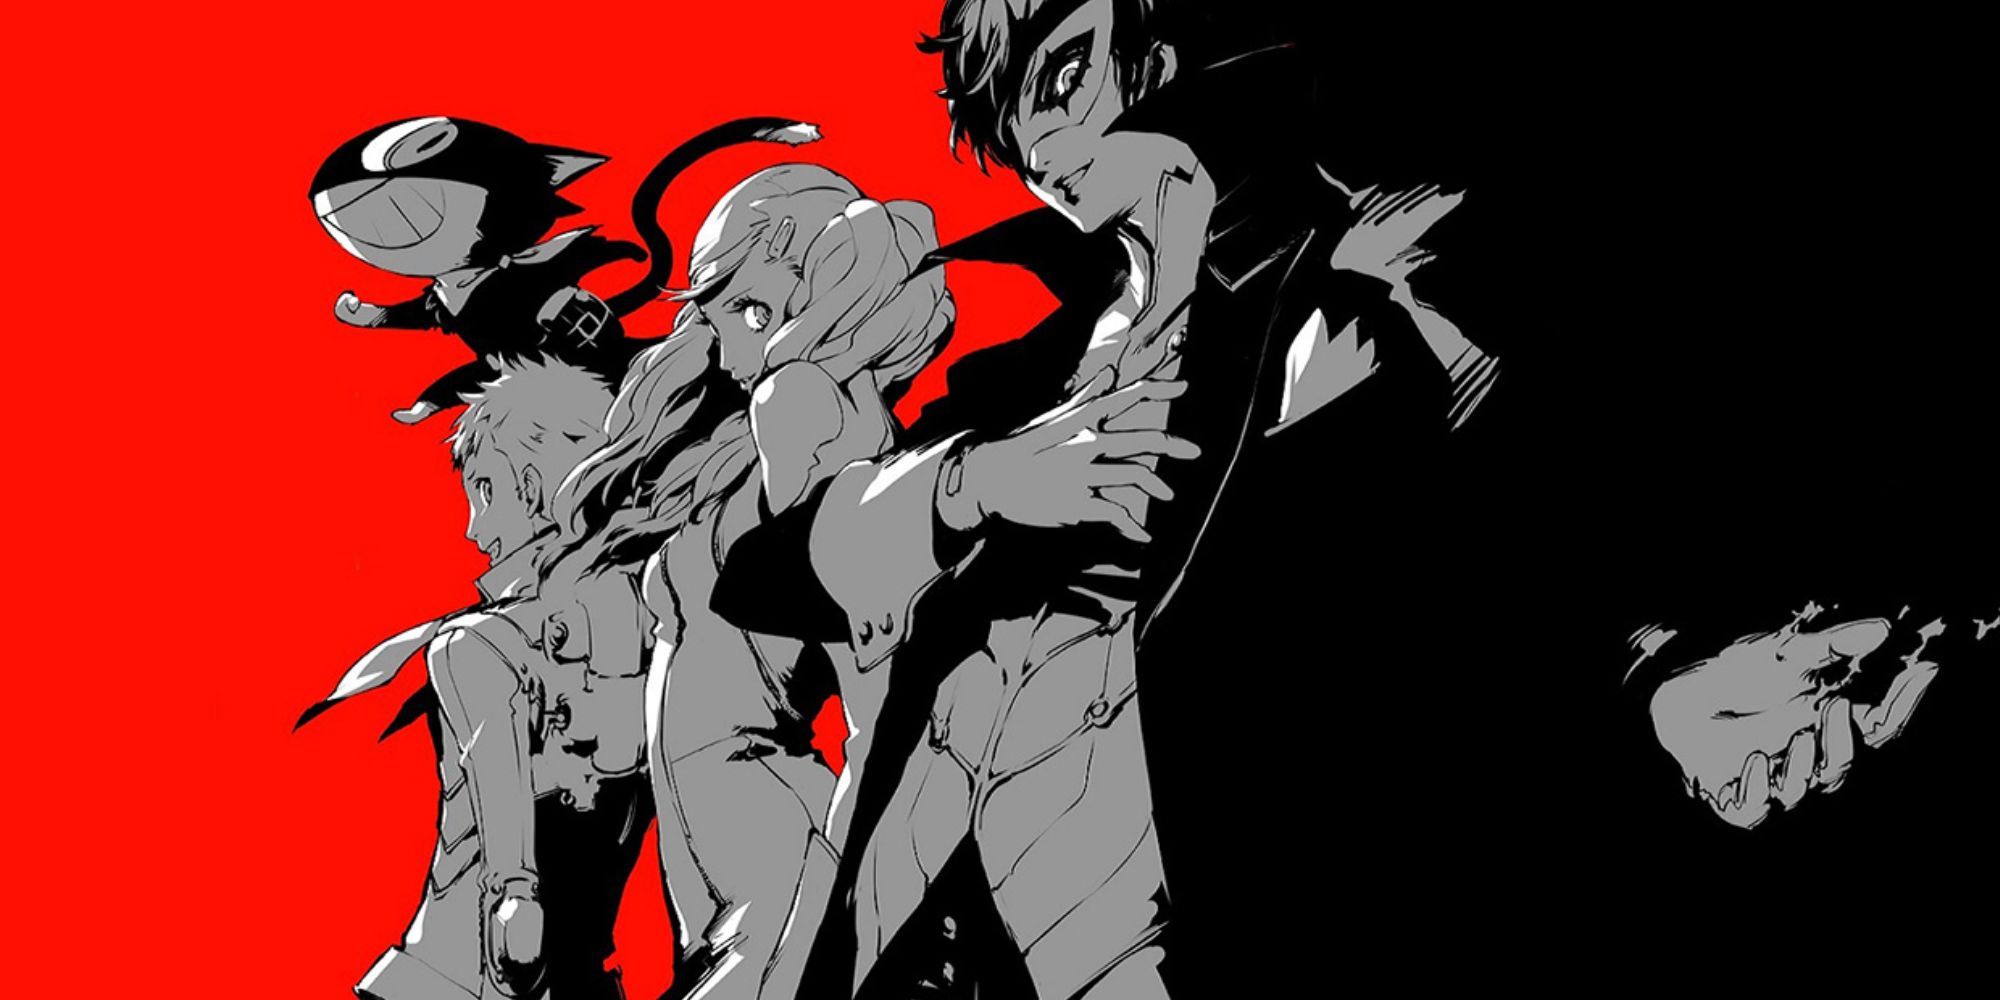 The cover art for Persona 5, showing the main cast on a black and red background